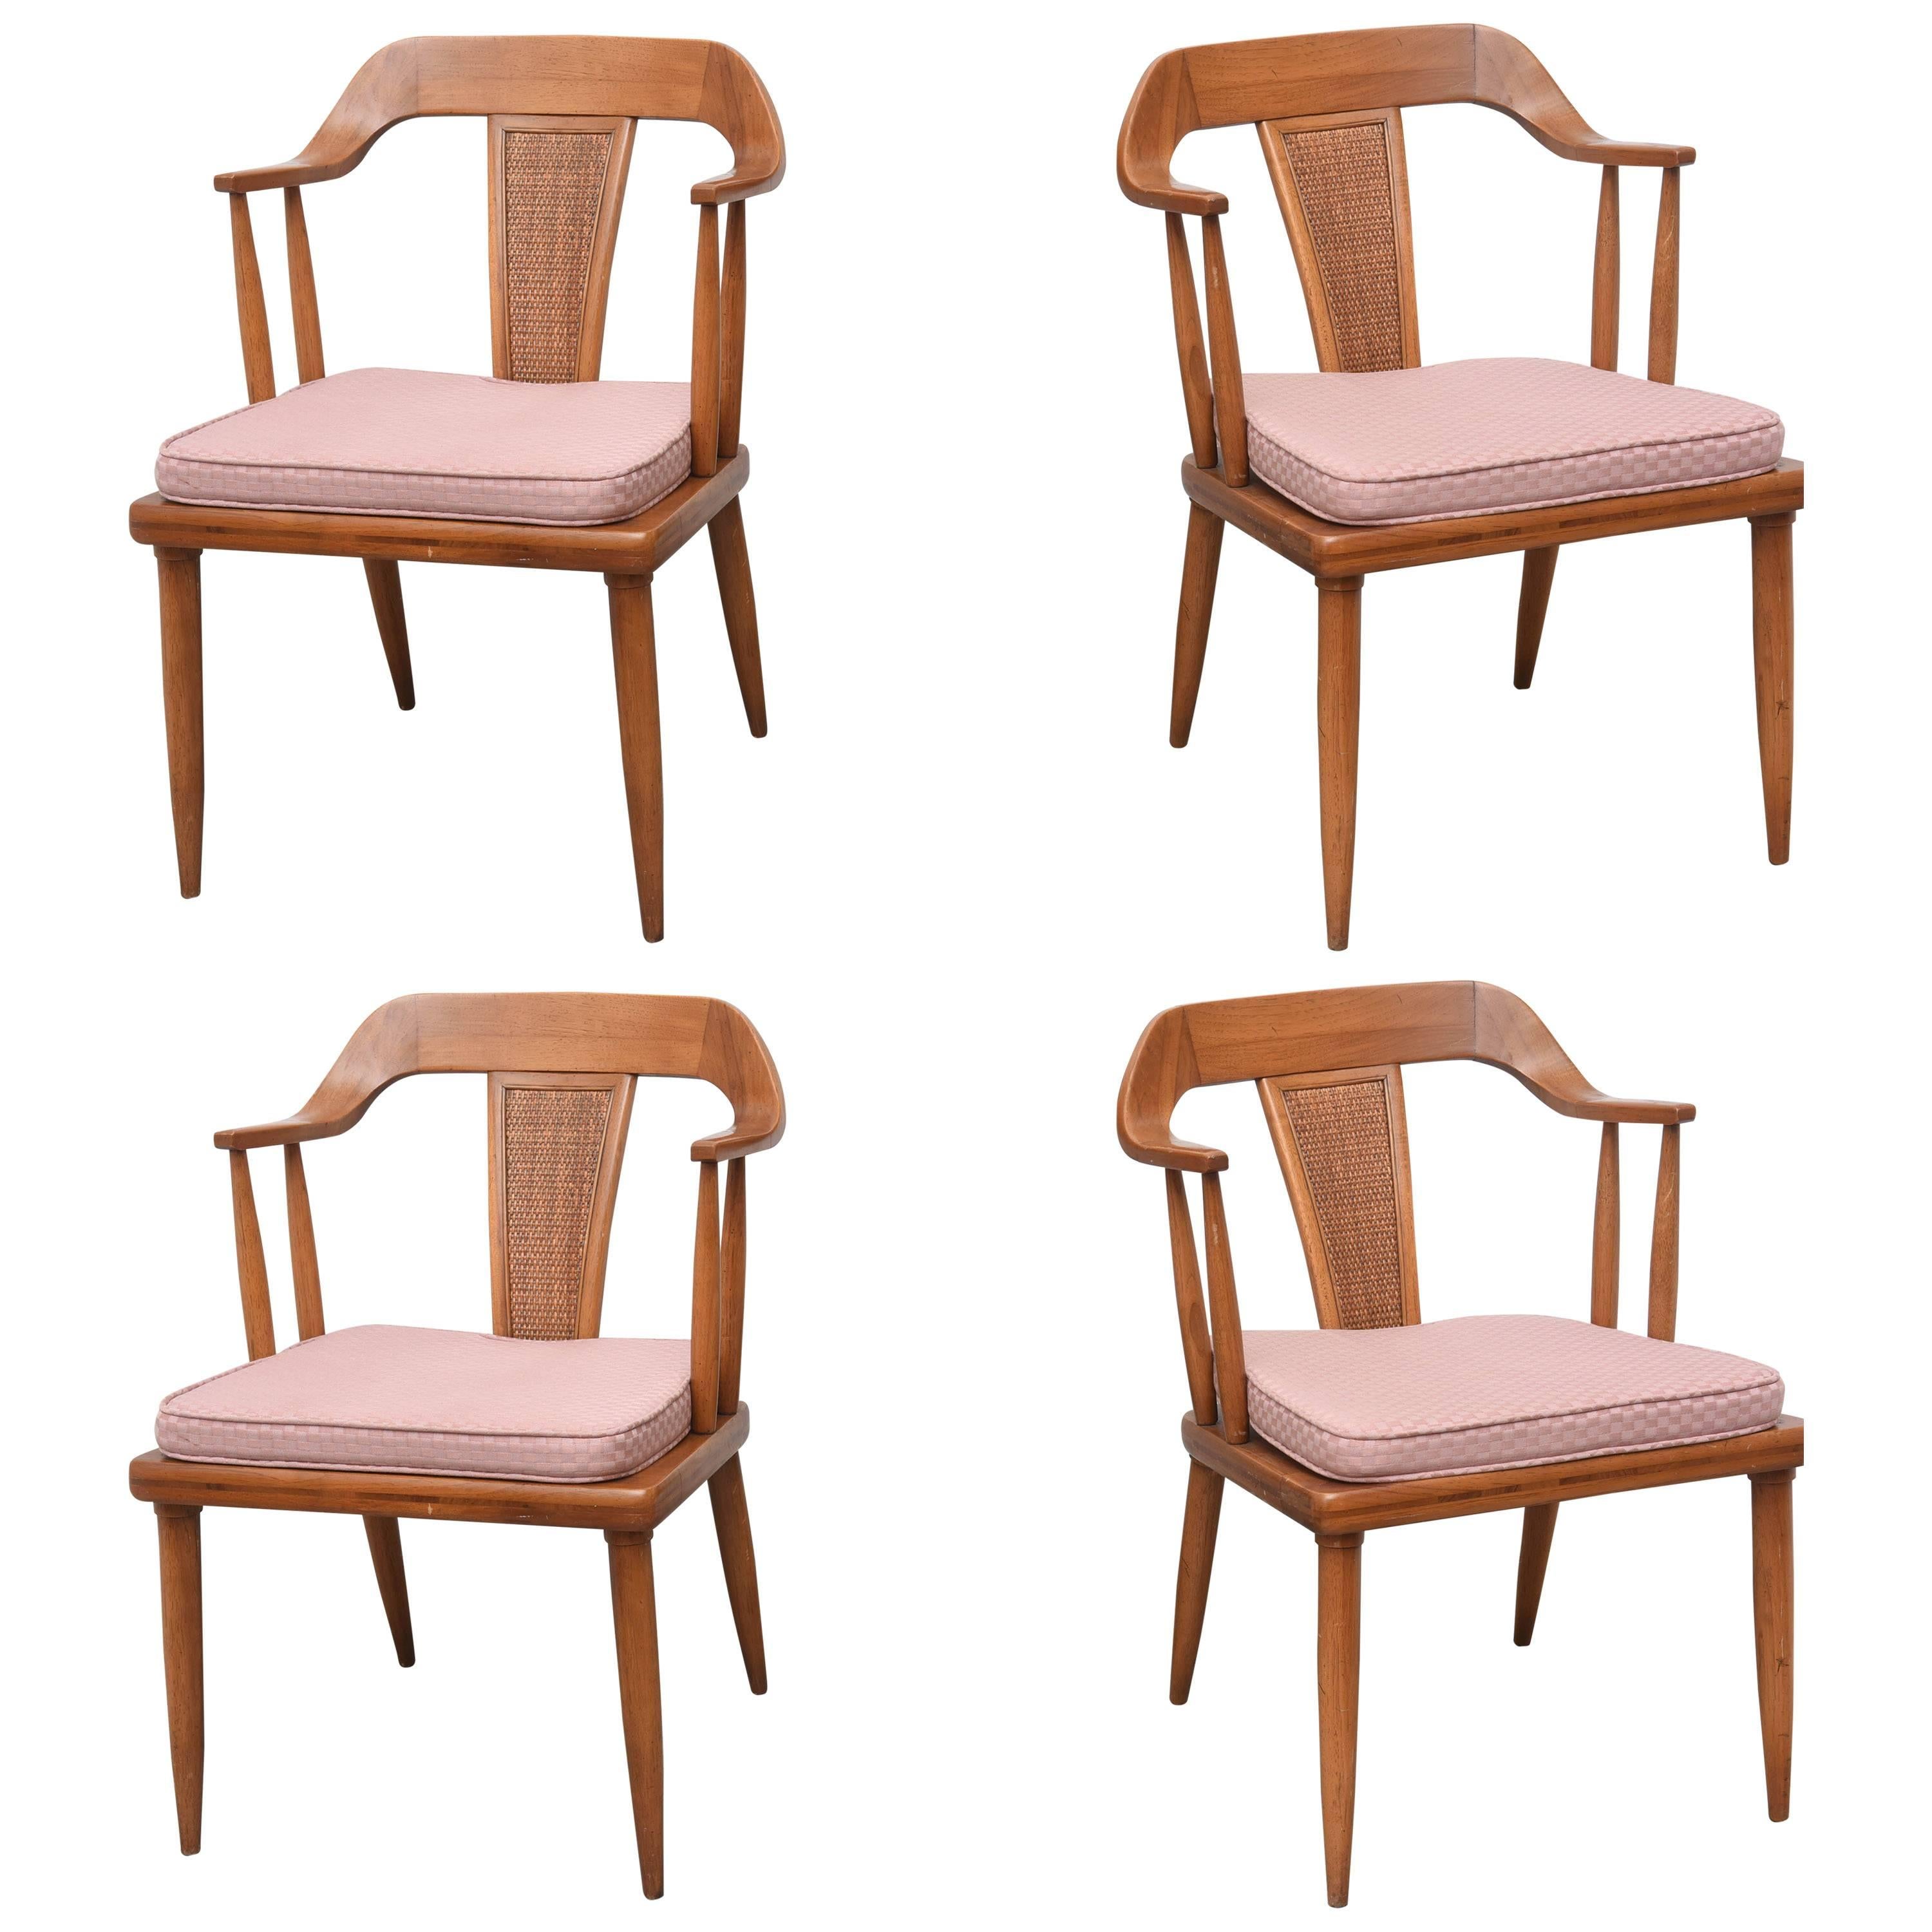 Tomlinson of High Point, Set of Four Dining Chairs, USA, 1957